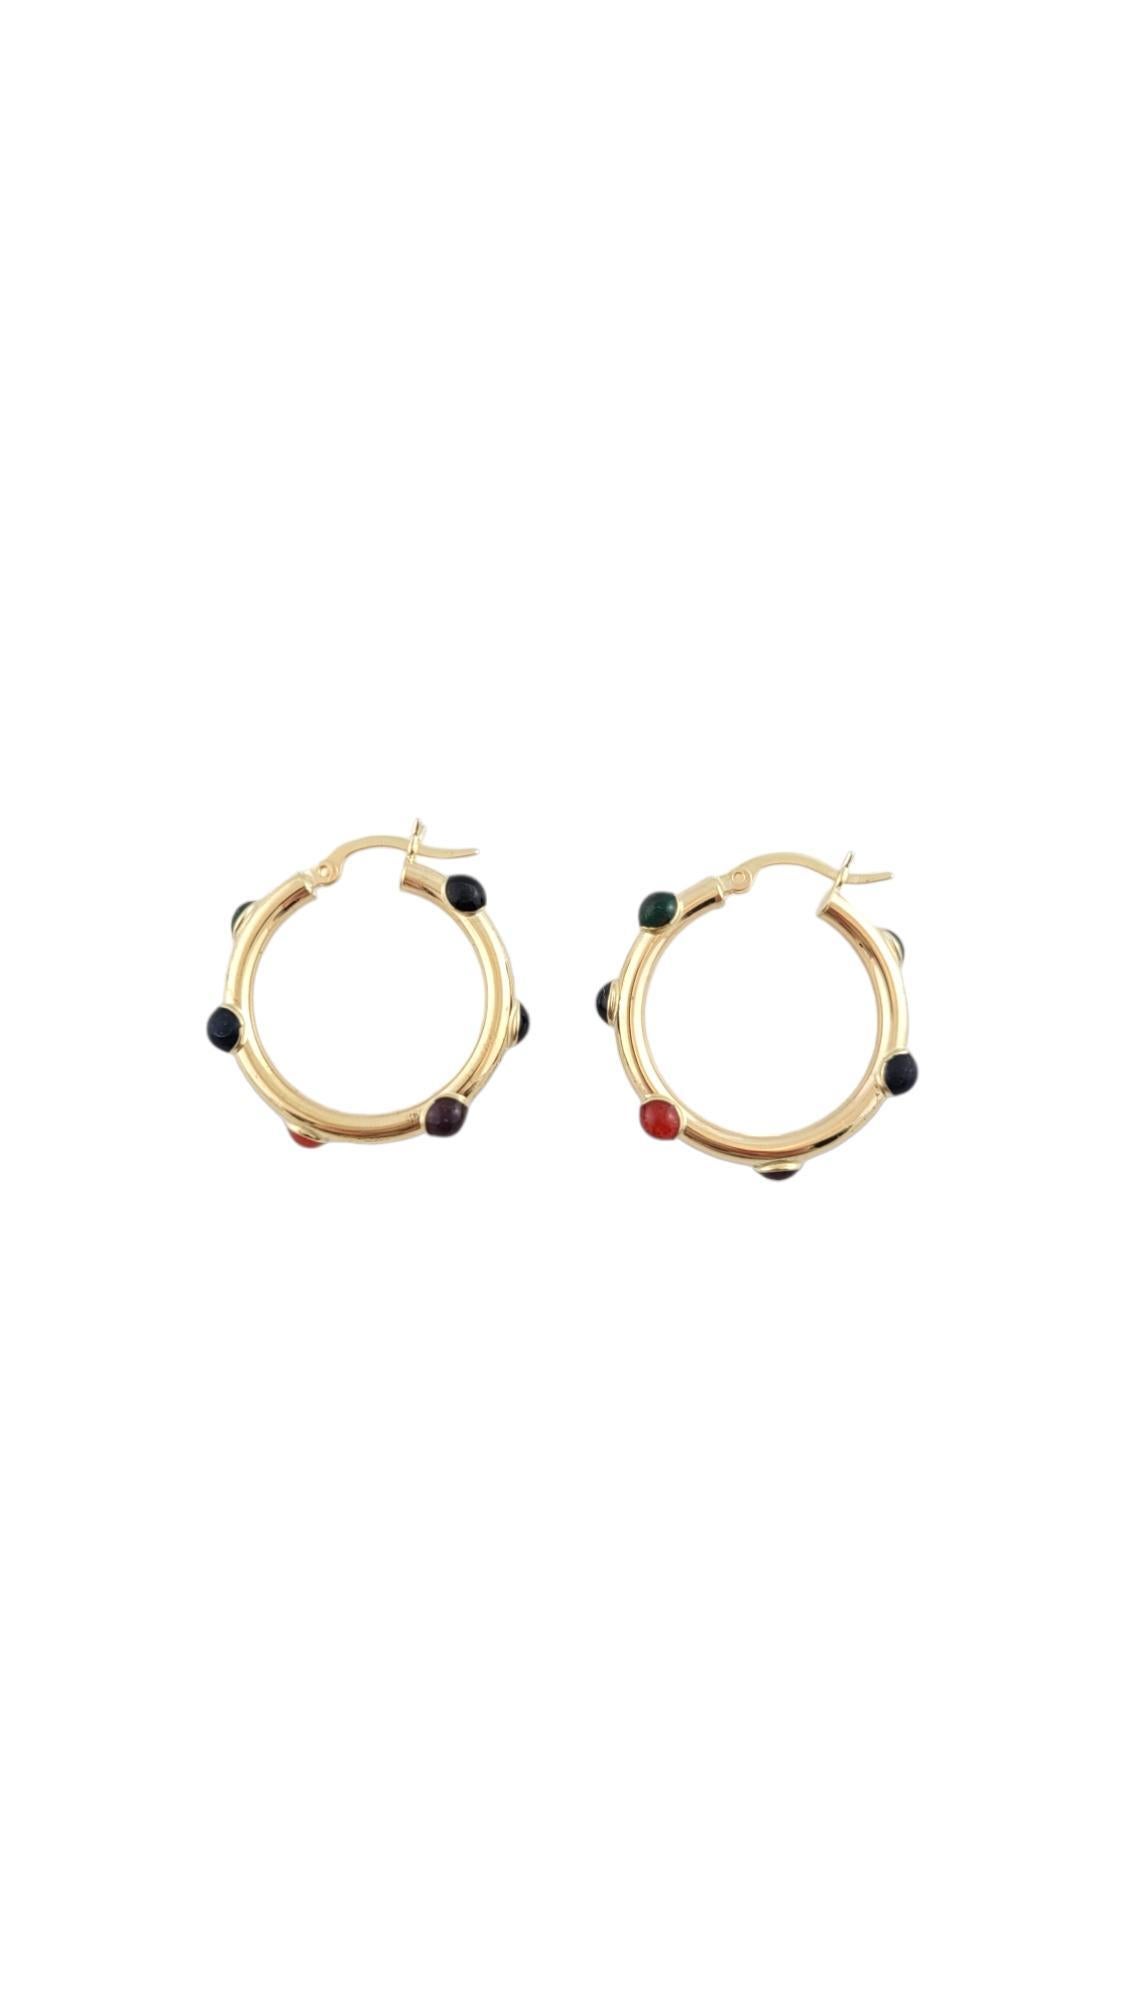 Vintage 14K Yellow Gold Hoop Earrings With Cabochon Accents

14 Karat gold hoop earrings with circular dot shaped cabochon accents.

Weight: 3.1 g/1.9 dwt.

Hallmark: 14K

Size: 28.2 mm X 3.7 mm X 28.5 mm

Approximately 3.1 mm thick.

Very good